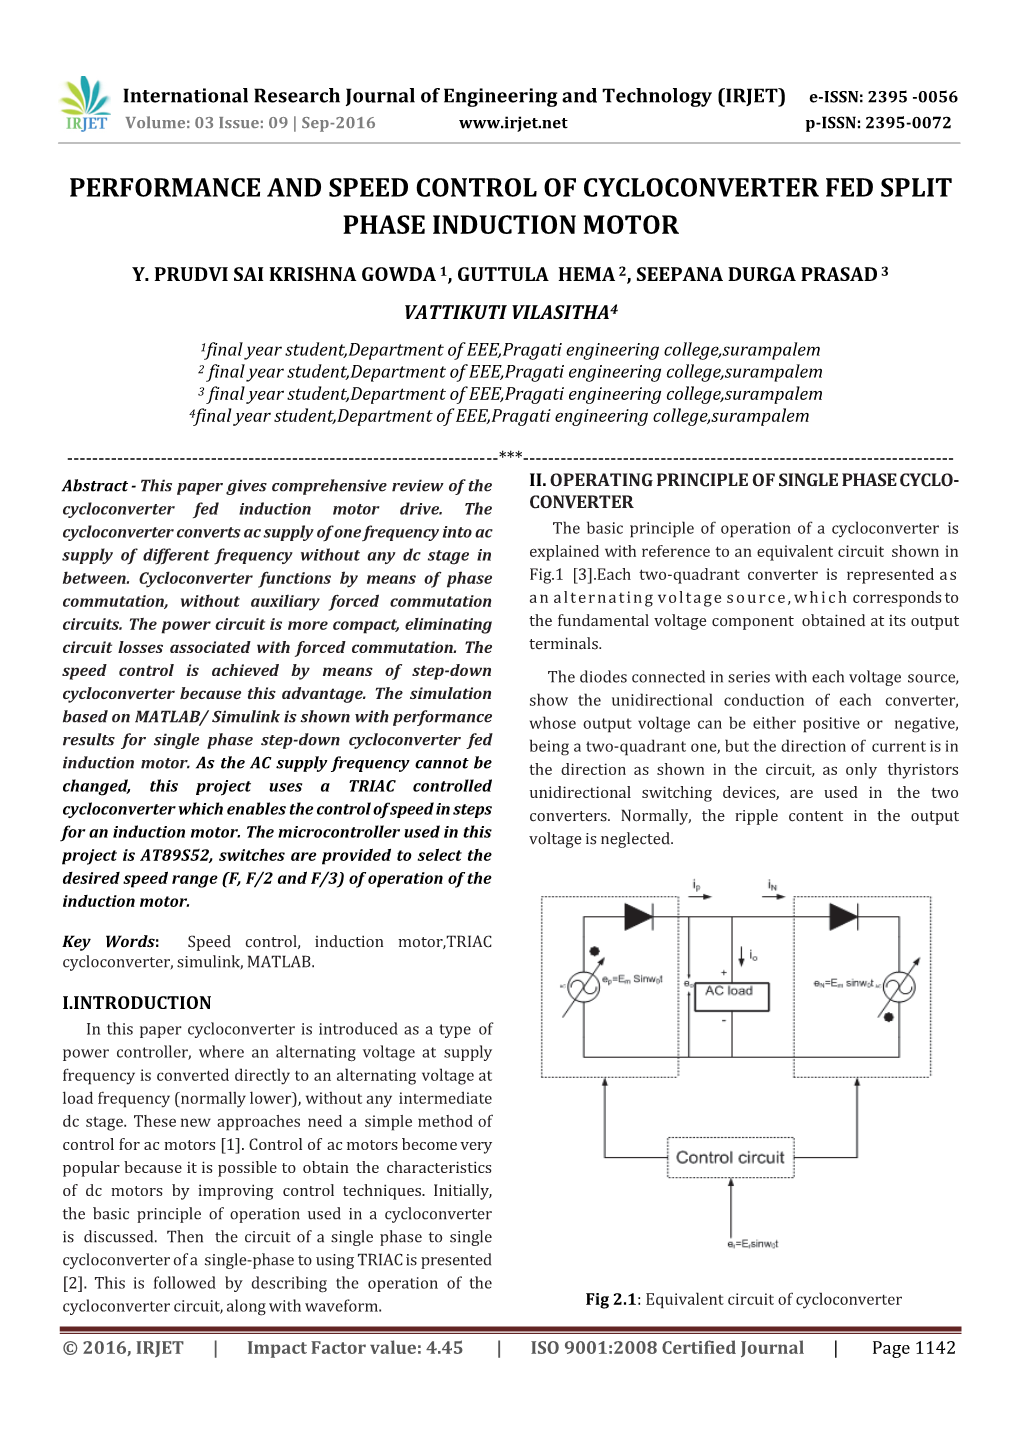 Performance and Speed Control of Cycloconverter Fed Split Phase Induction Motor